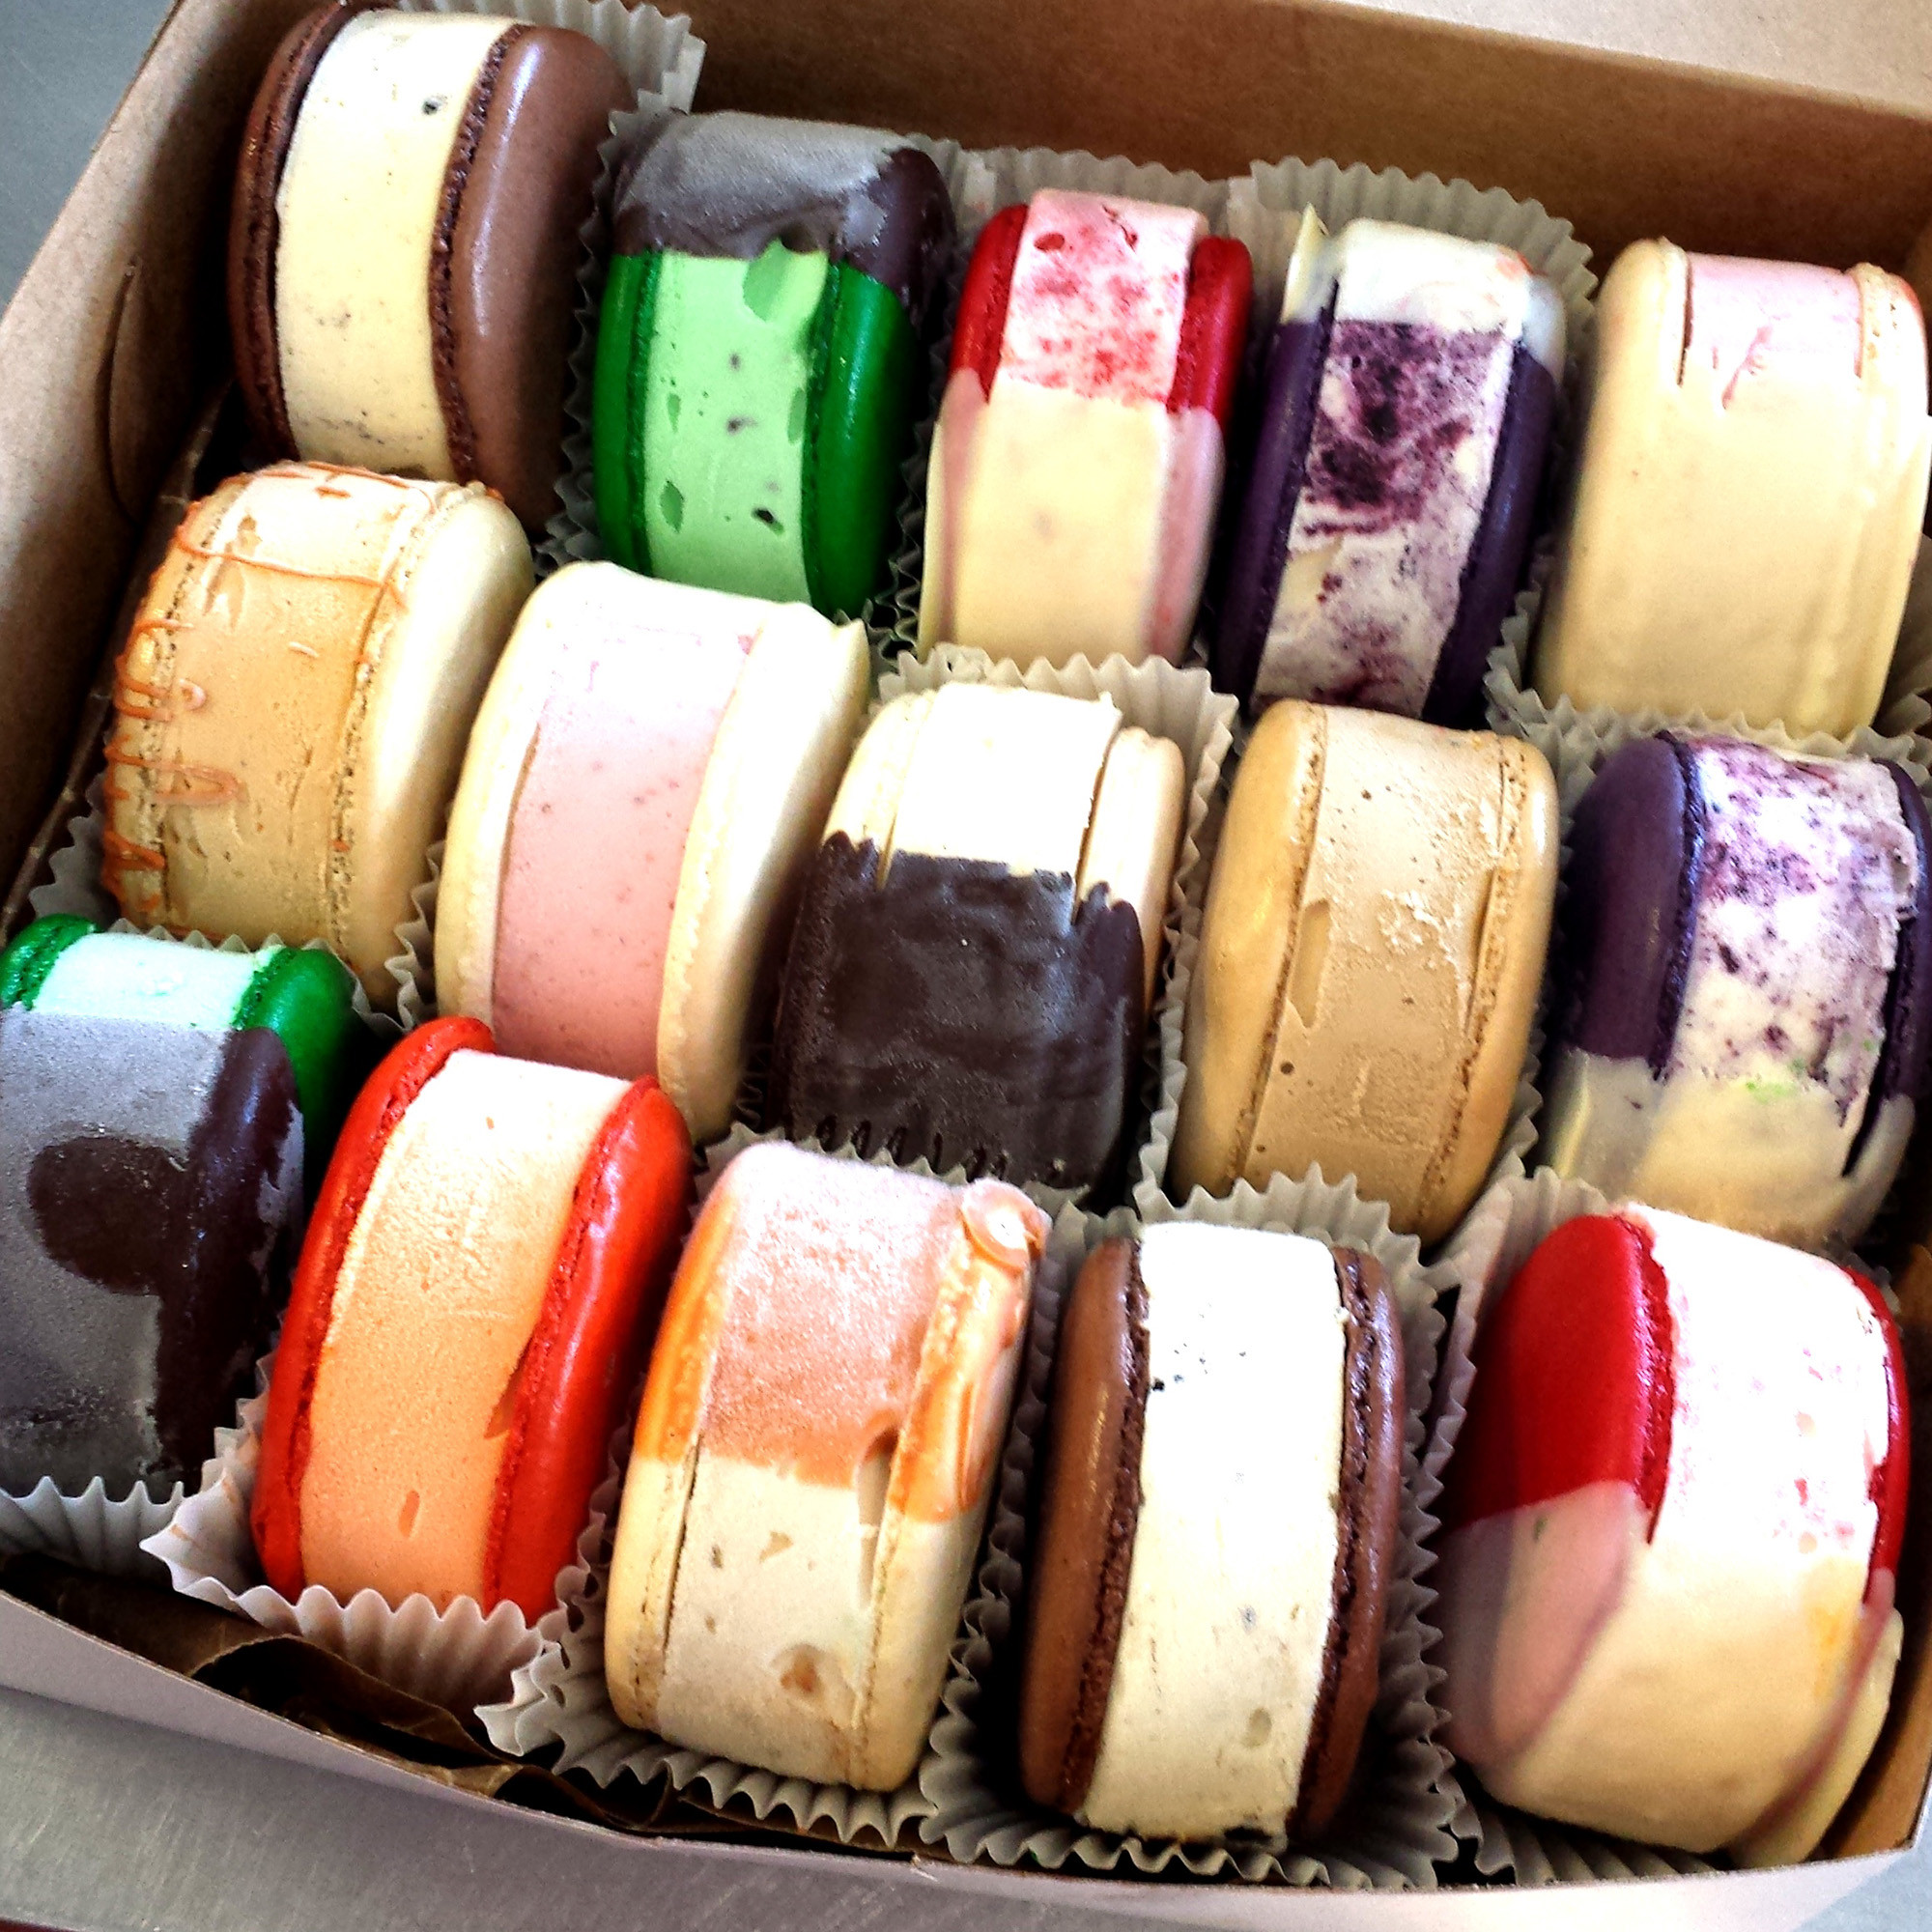 Best Desserts In La
 Best Places For Macarons In Los Angeles CBS Los Angeles